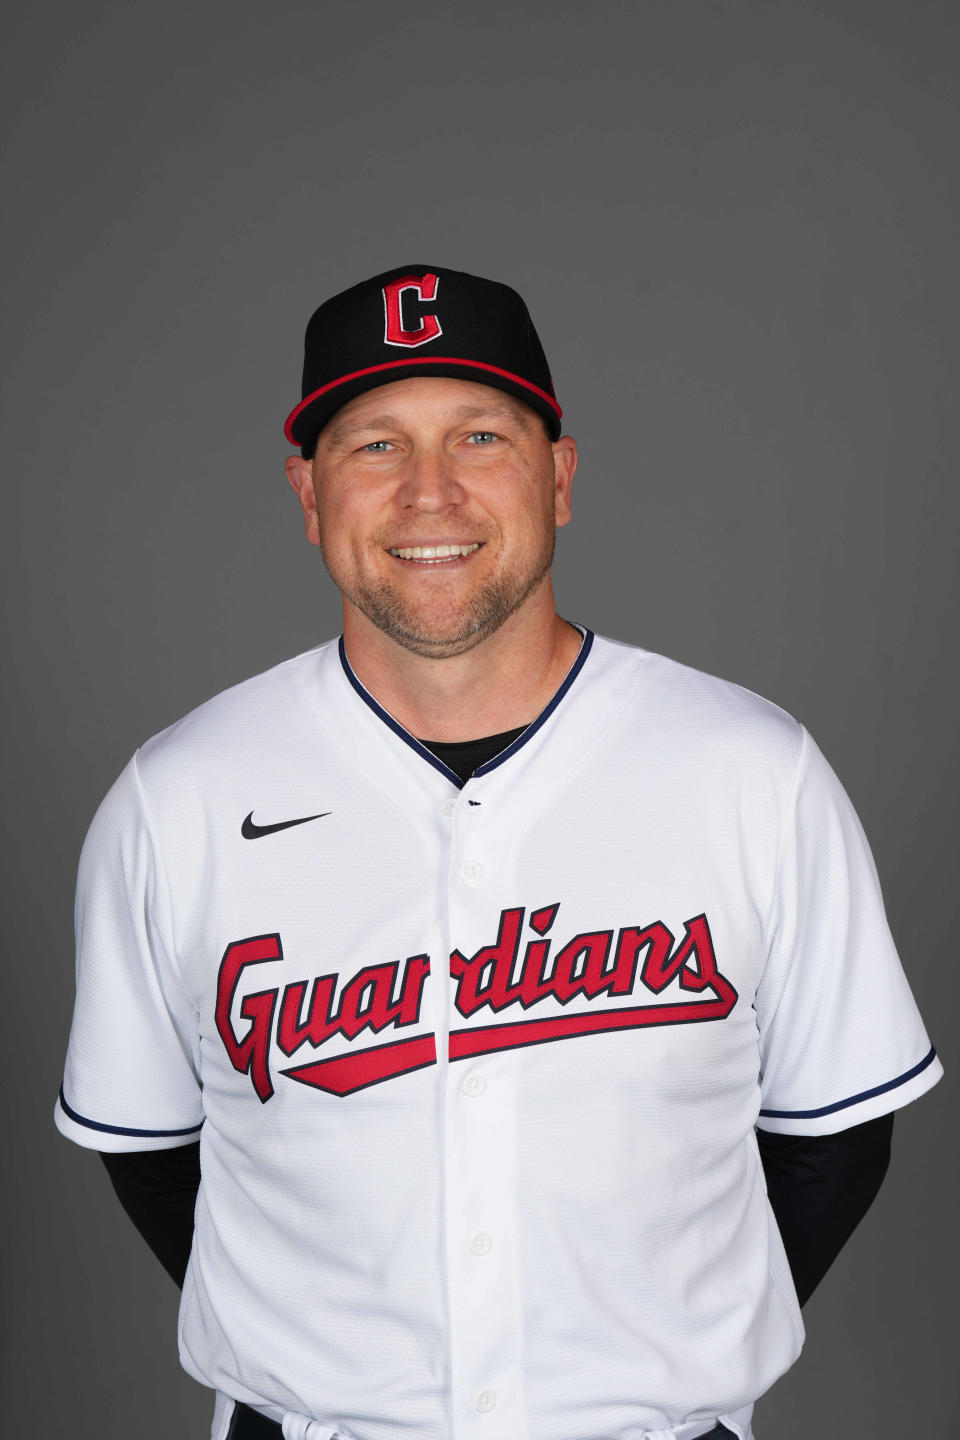 Cleveland Guardians coach Chris Valaika poses for a photo during Media Day Feb. 22 at the Cleveland Guardians Spring Training Facility   in Goodyear, Arizona.